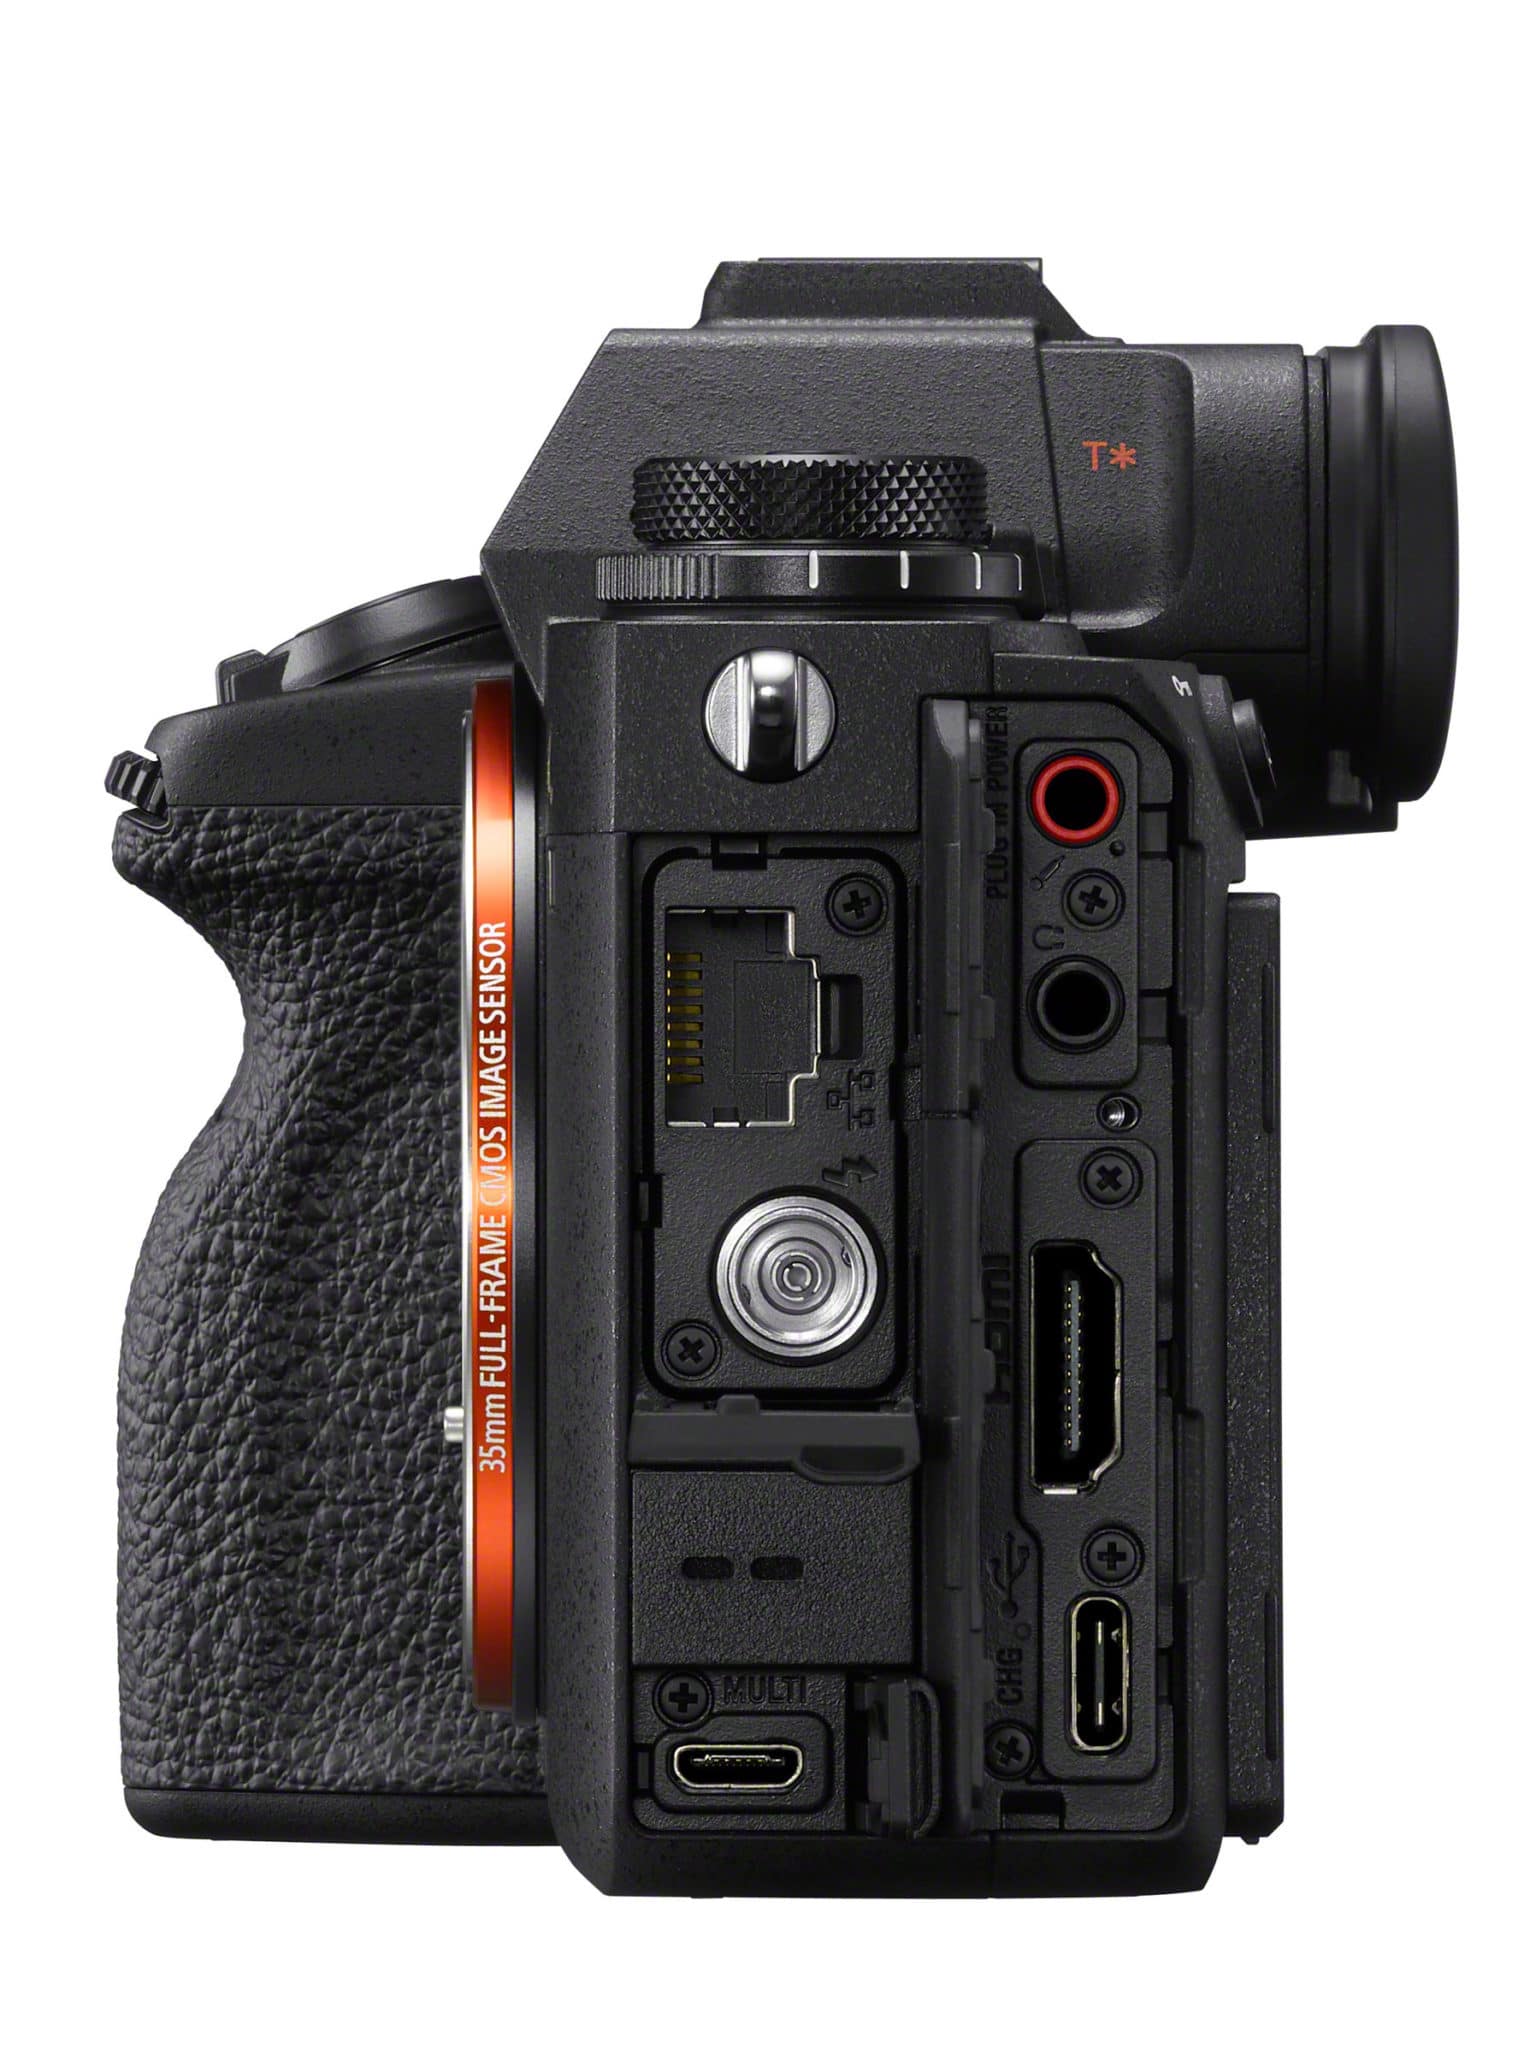 Layout of the ports of the Sony A1 Camera. Note the T* viewfinder.